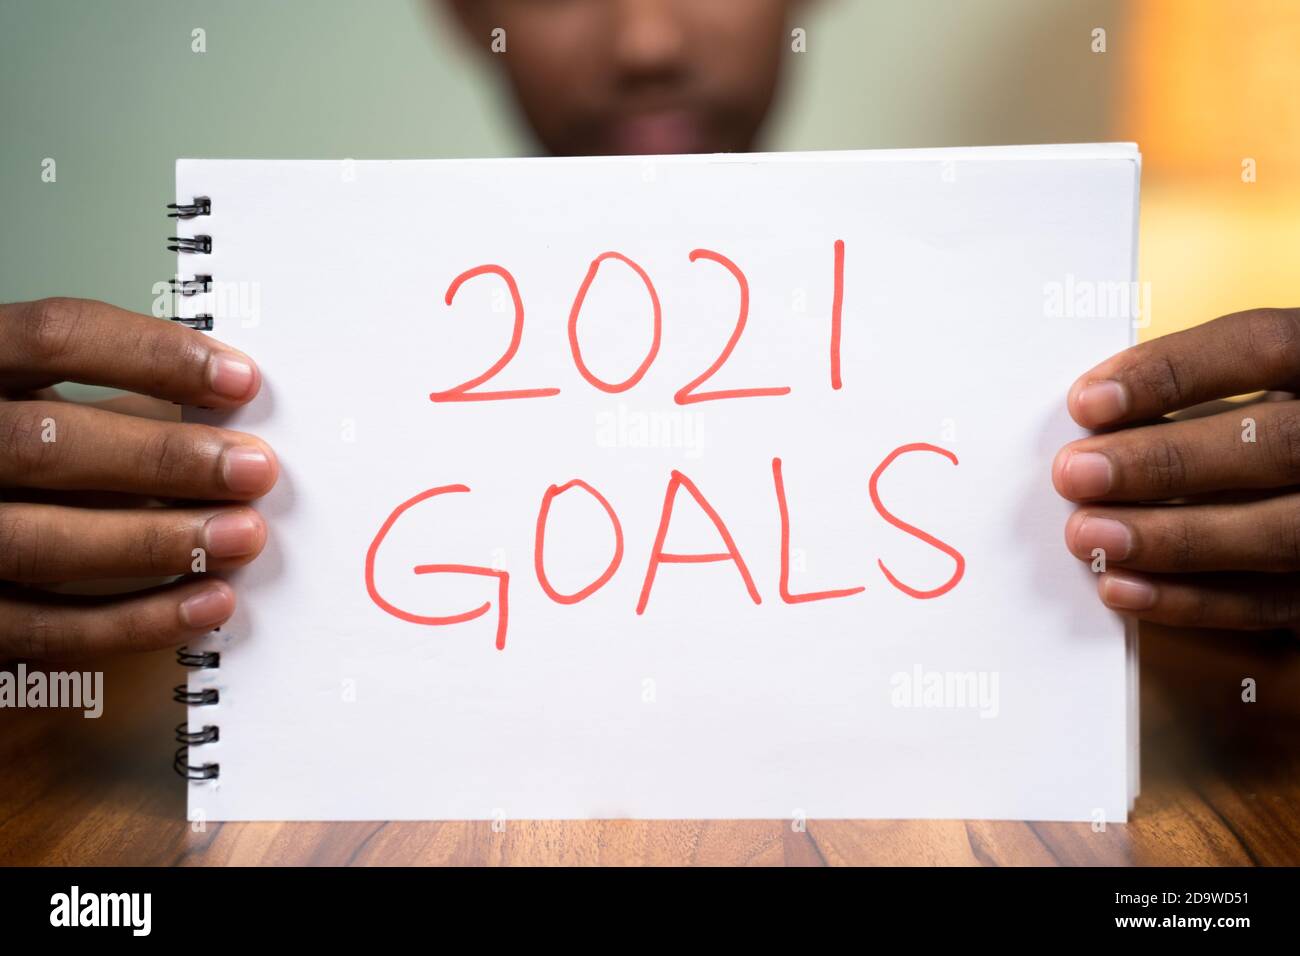 Man on table holding 2021 goals book in front of camera - concept of planning 2021 new year goals. Stock Photo